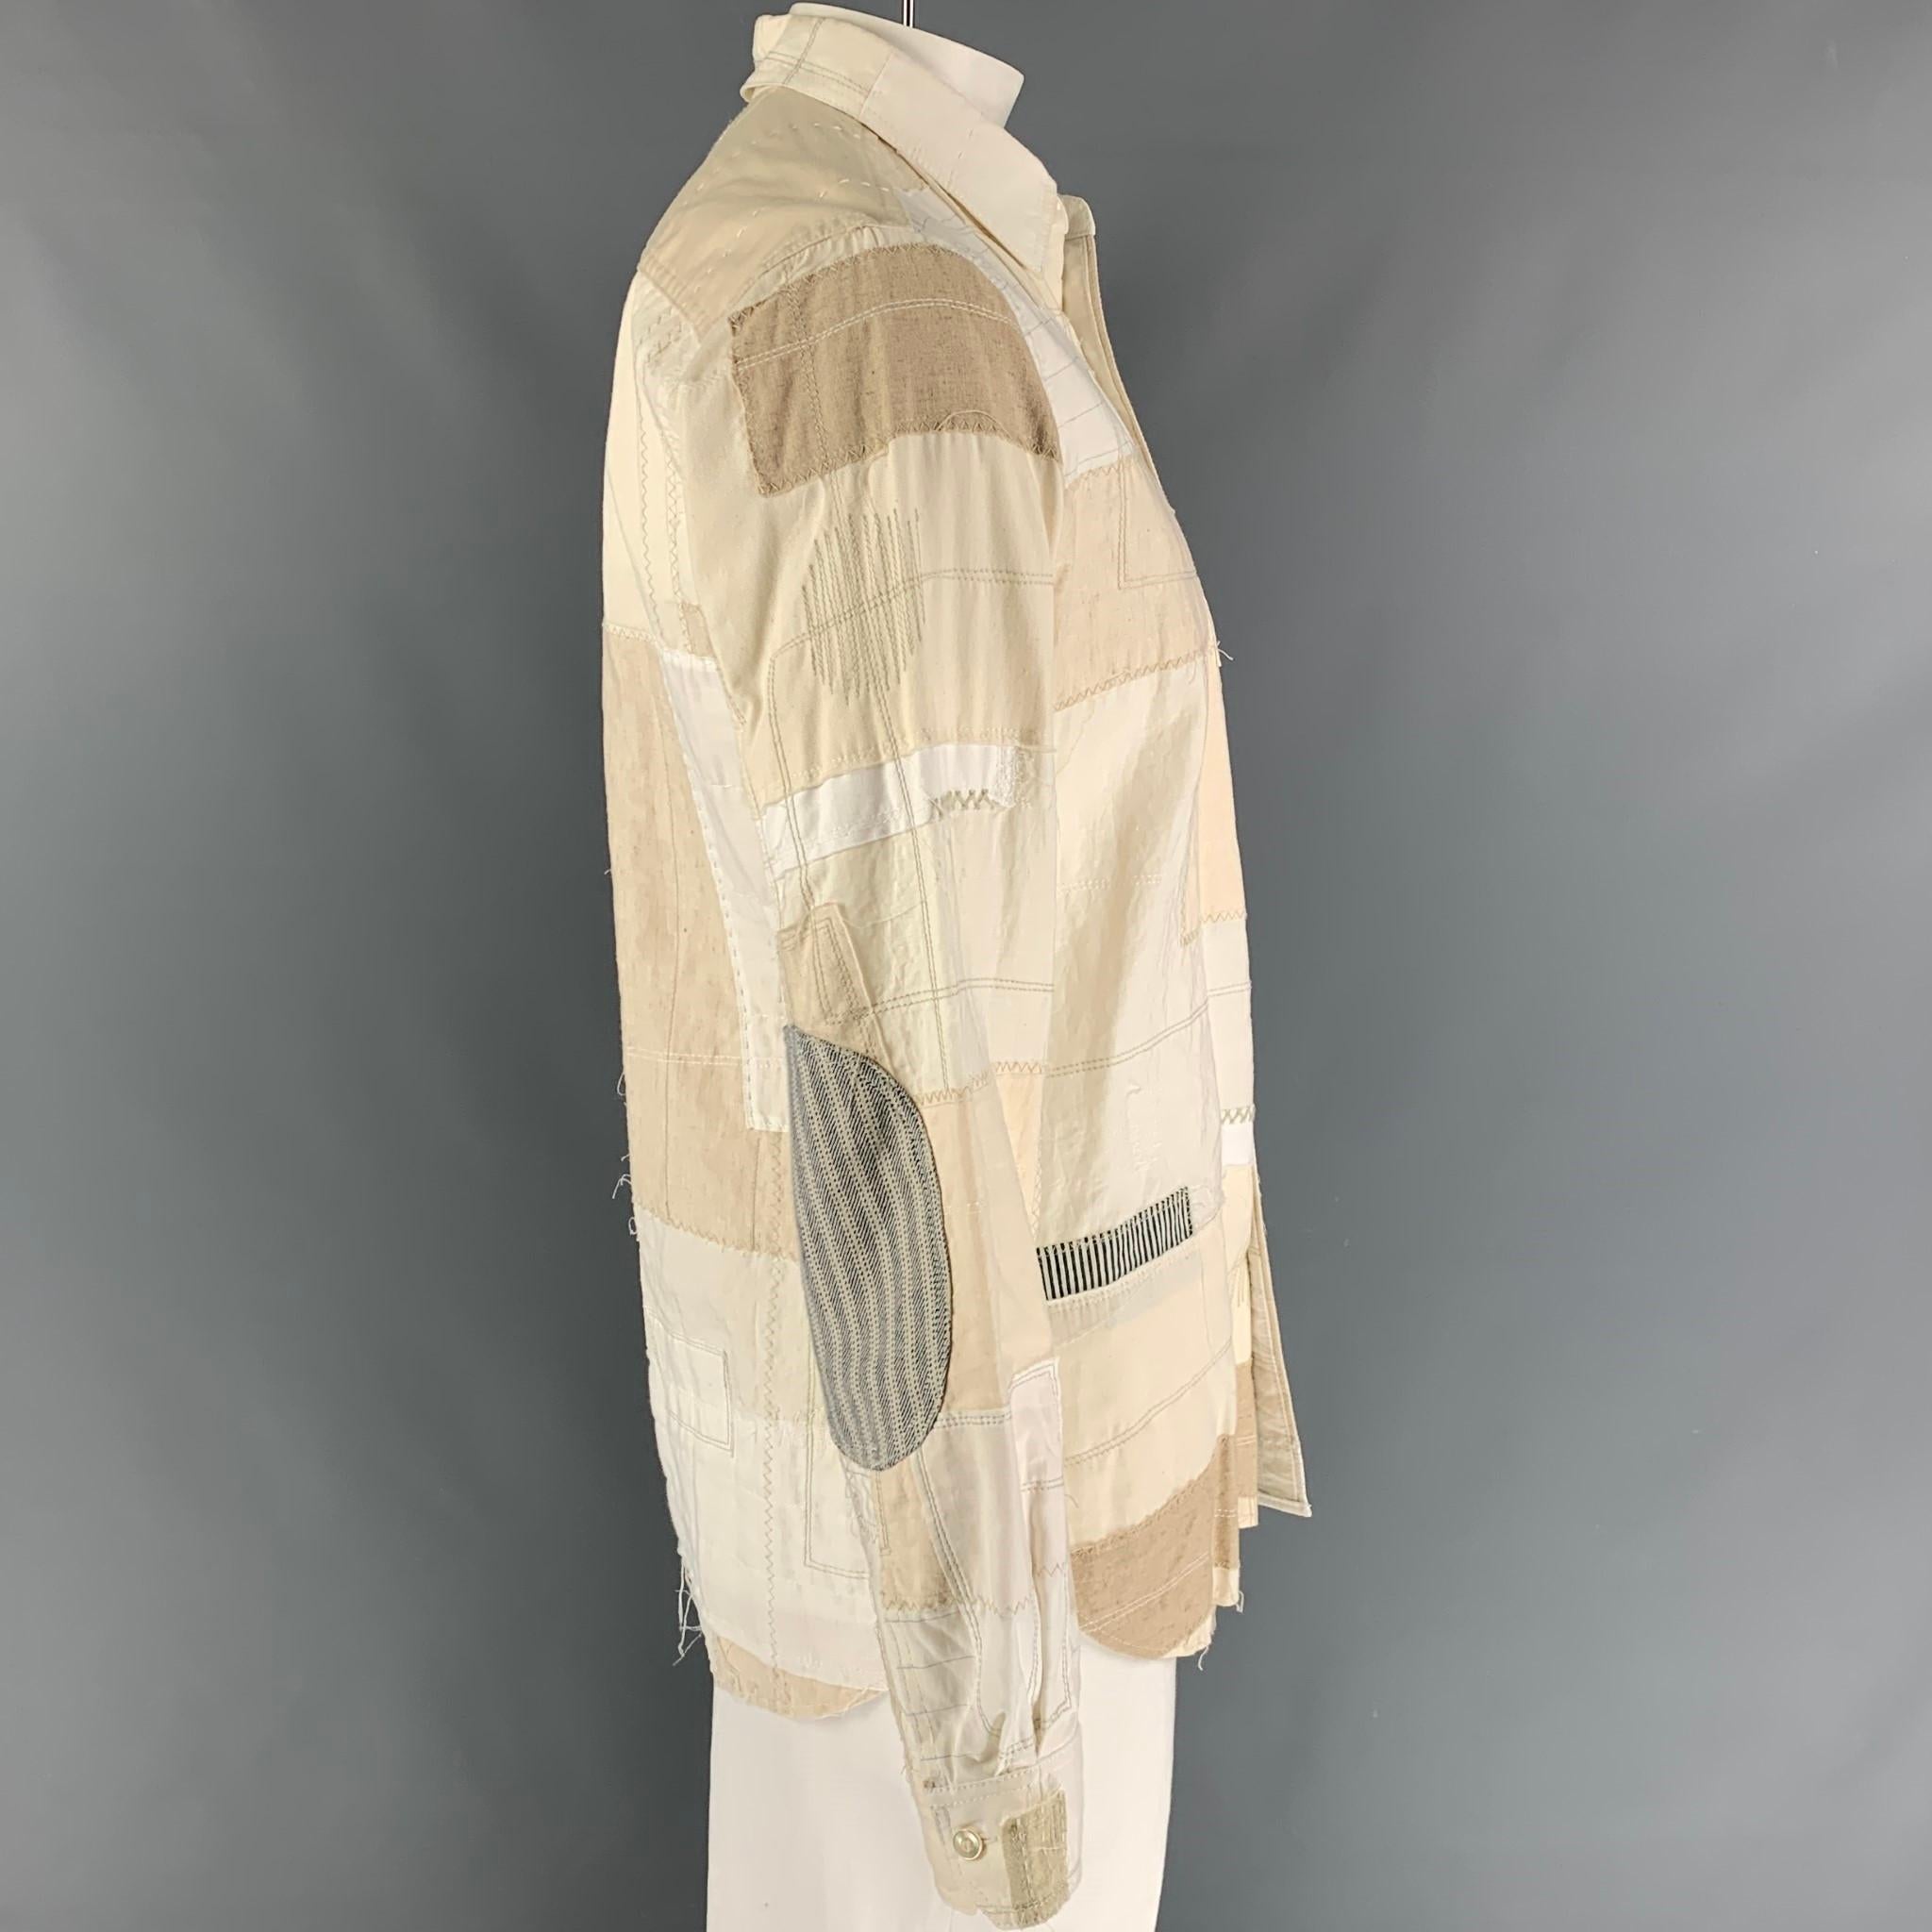 JUNYA WATANABE long sleeve shirt comes in a beige patchwork cotton / linen featuring a front pocket, spread collar, and a buttoned closure. Made in Japan. 

Very Good Pre-Owned Condition.
Marked: XL / AD2014

Measurements:

Shoulder: 18 in.
Chest: